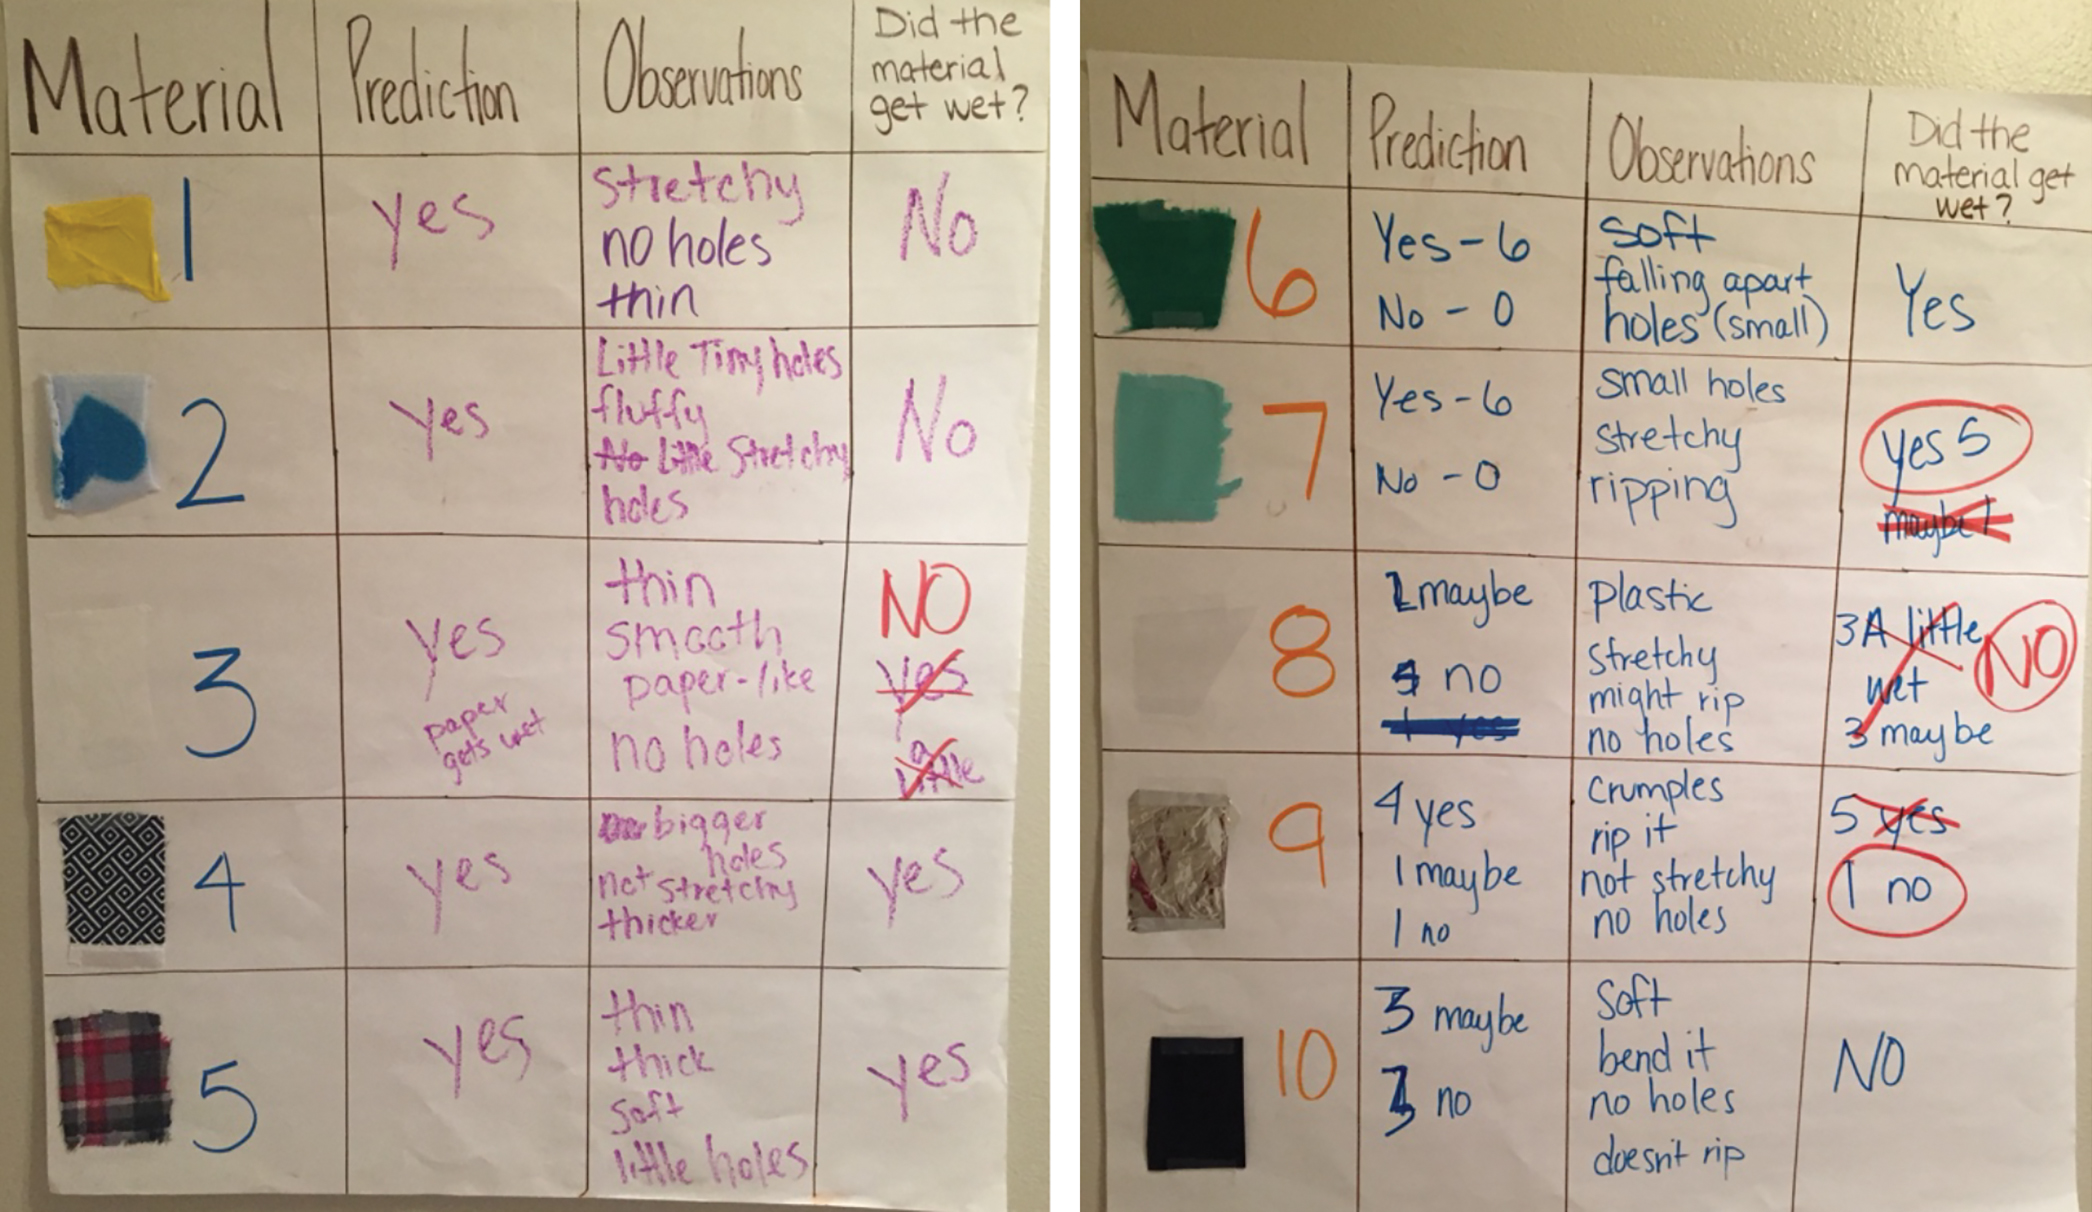 Material predictions, observations, and results.